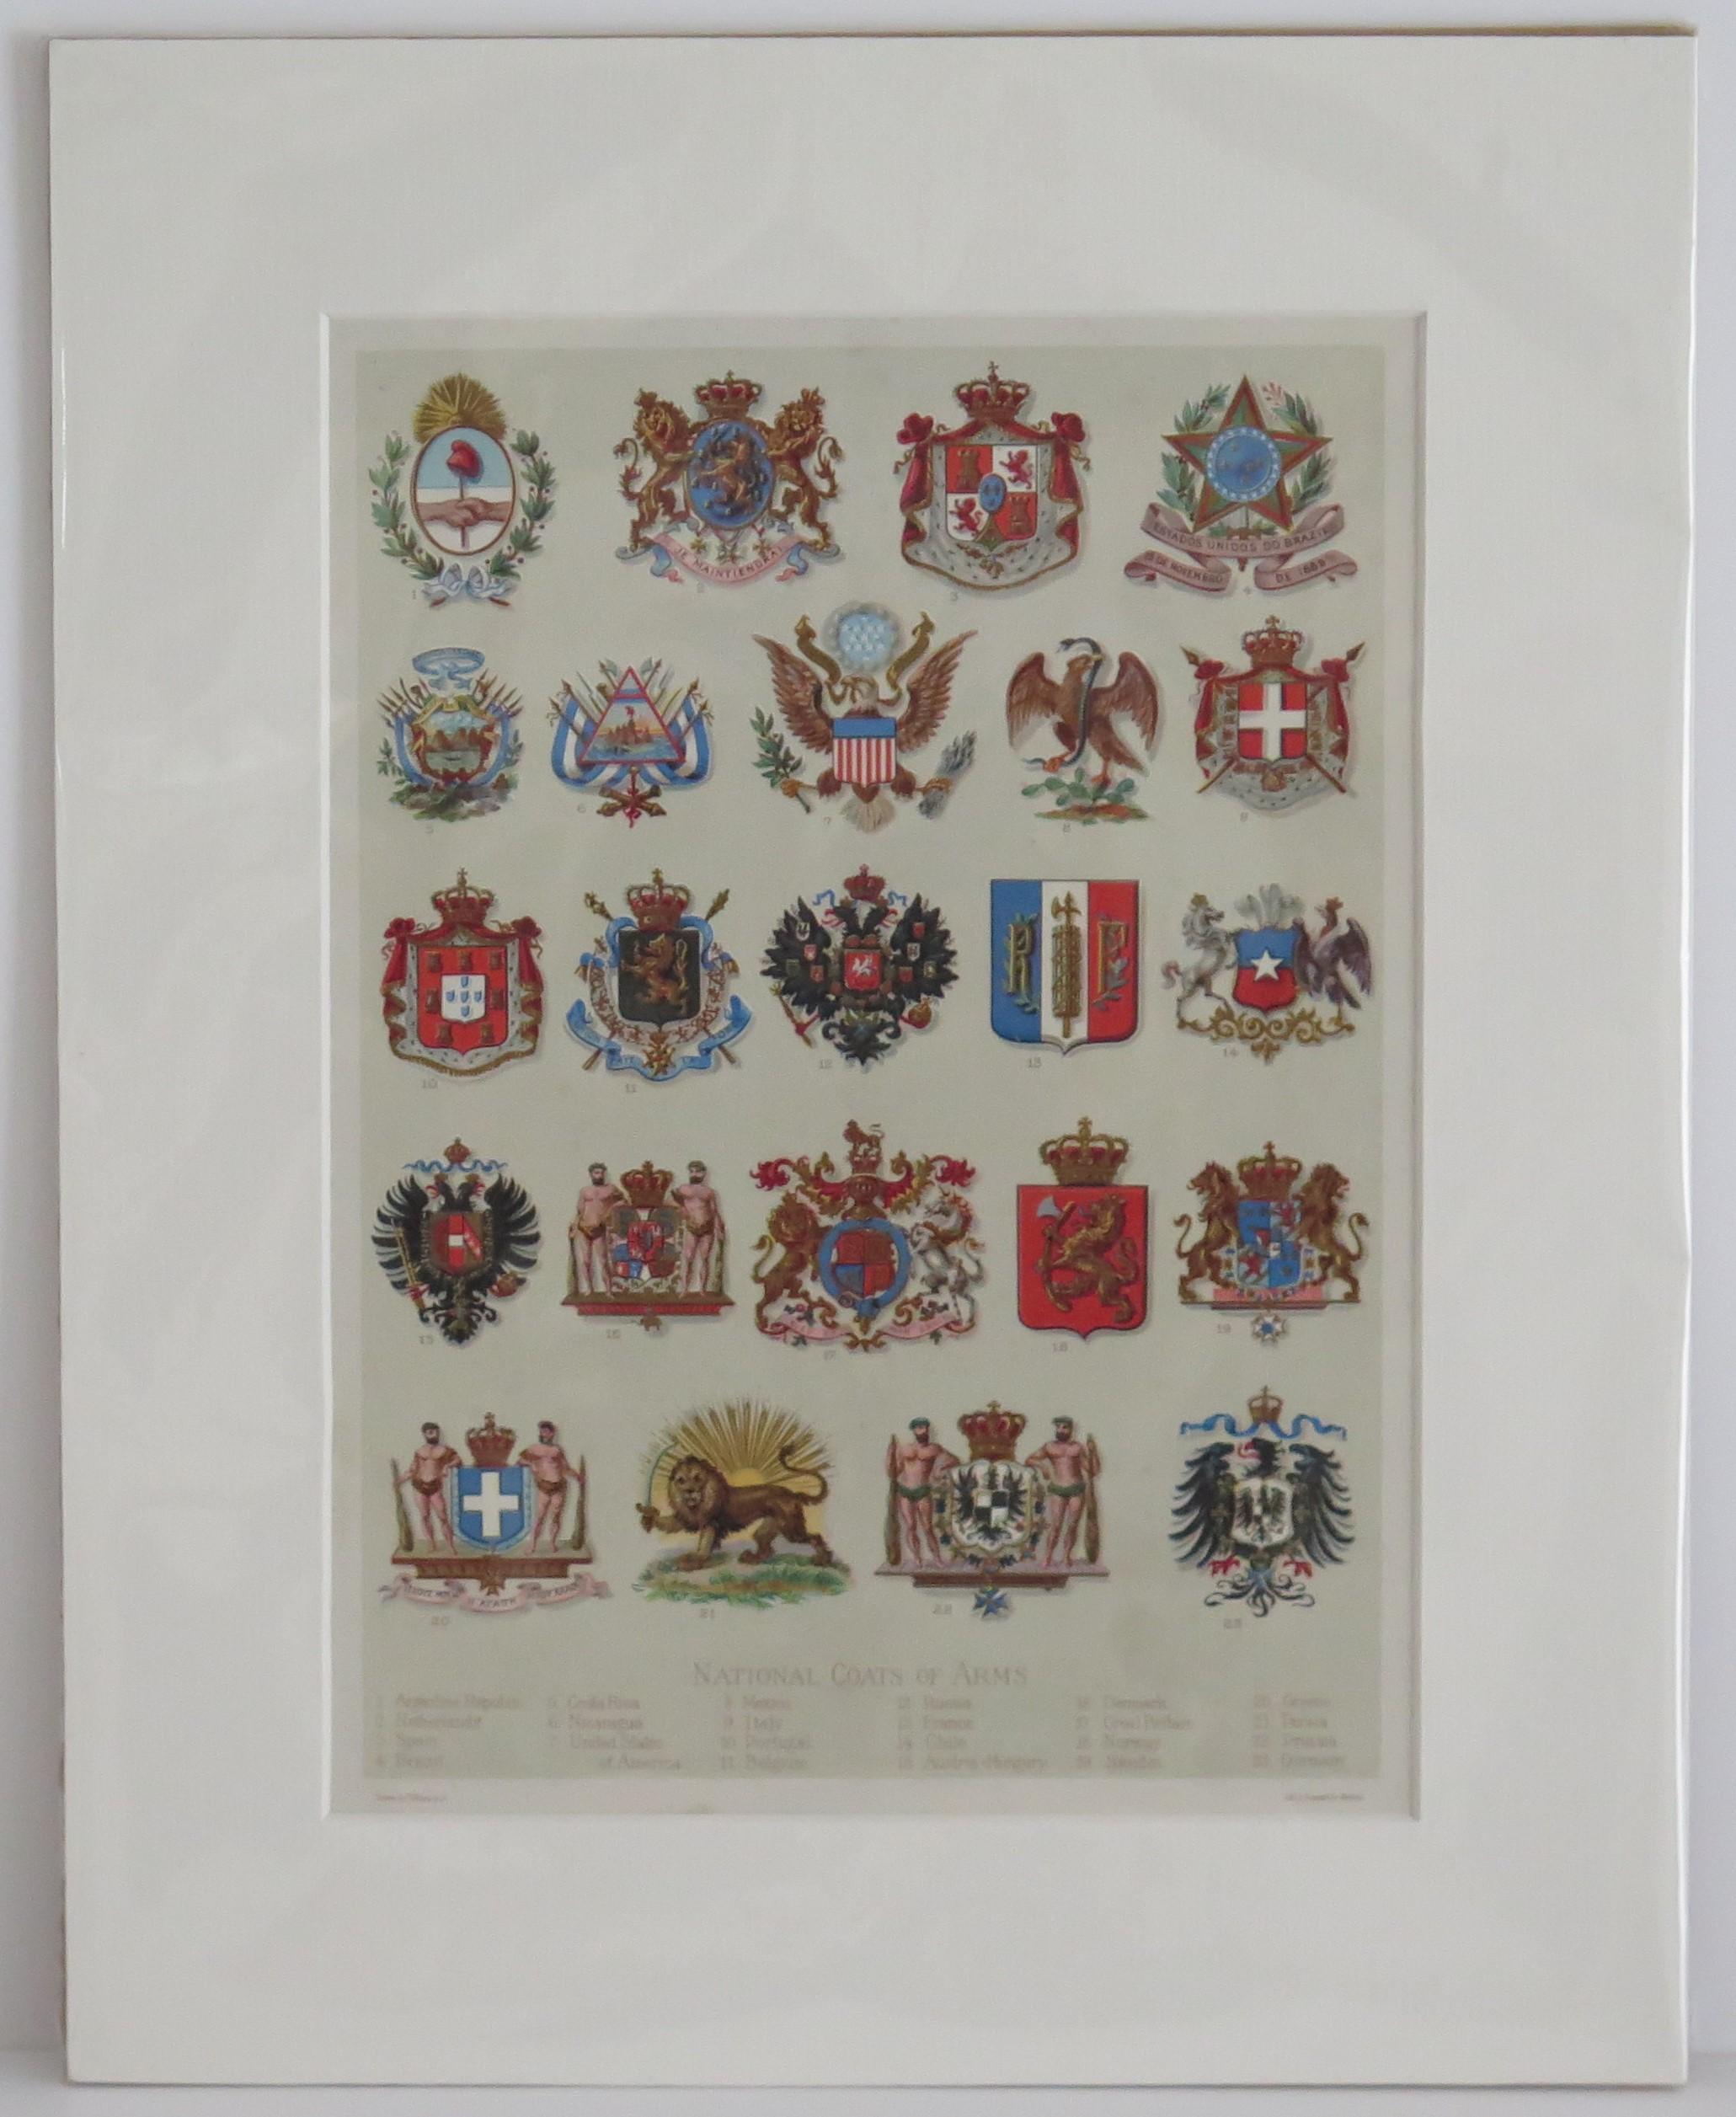 This is a very good coloured Lithograph Print of National Coats Of Arms. 

The print is mounted all ready for framing.
The external measurements of the mount are 12 W x 15 H and the print is 8 W x 11 H, all in inches.

It shows the individual